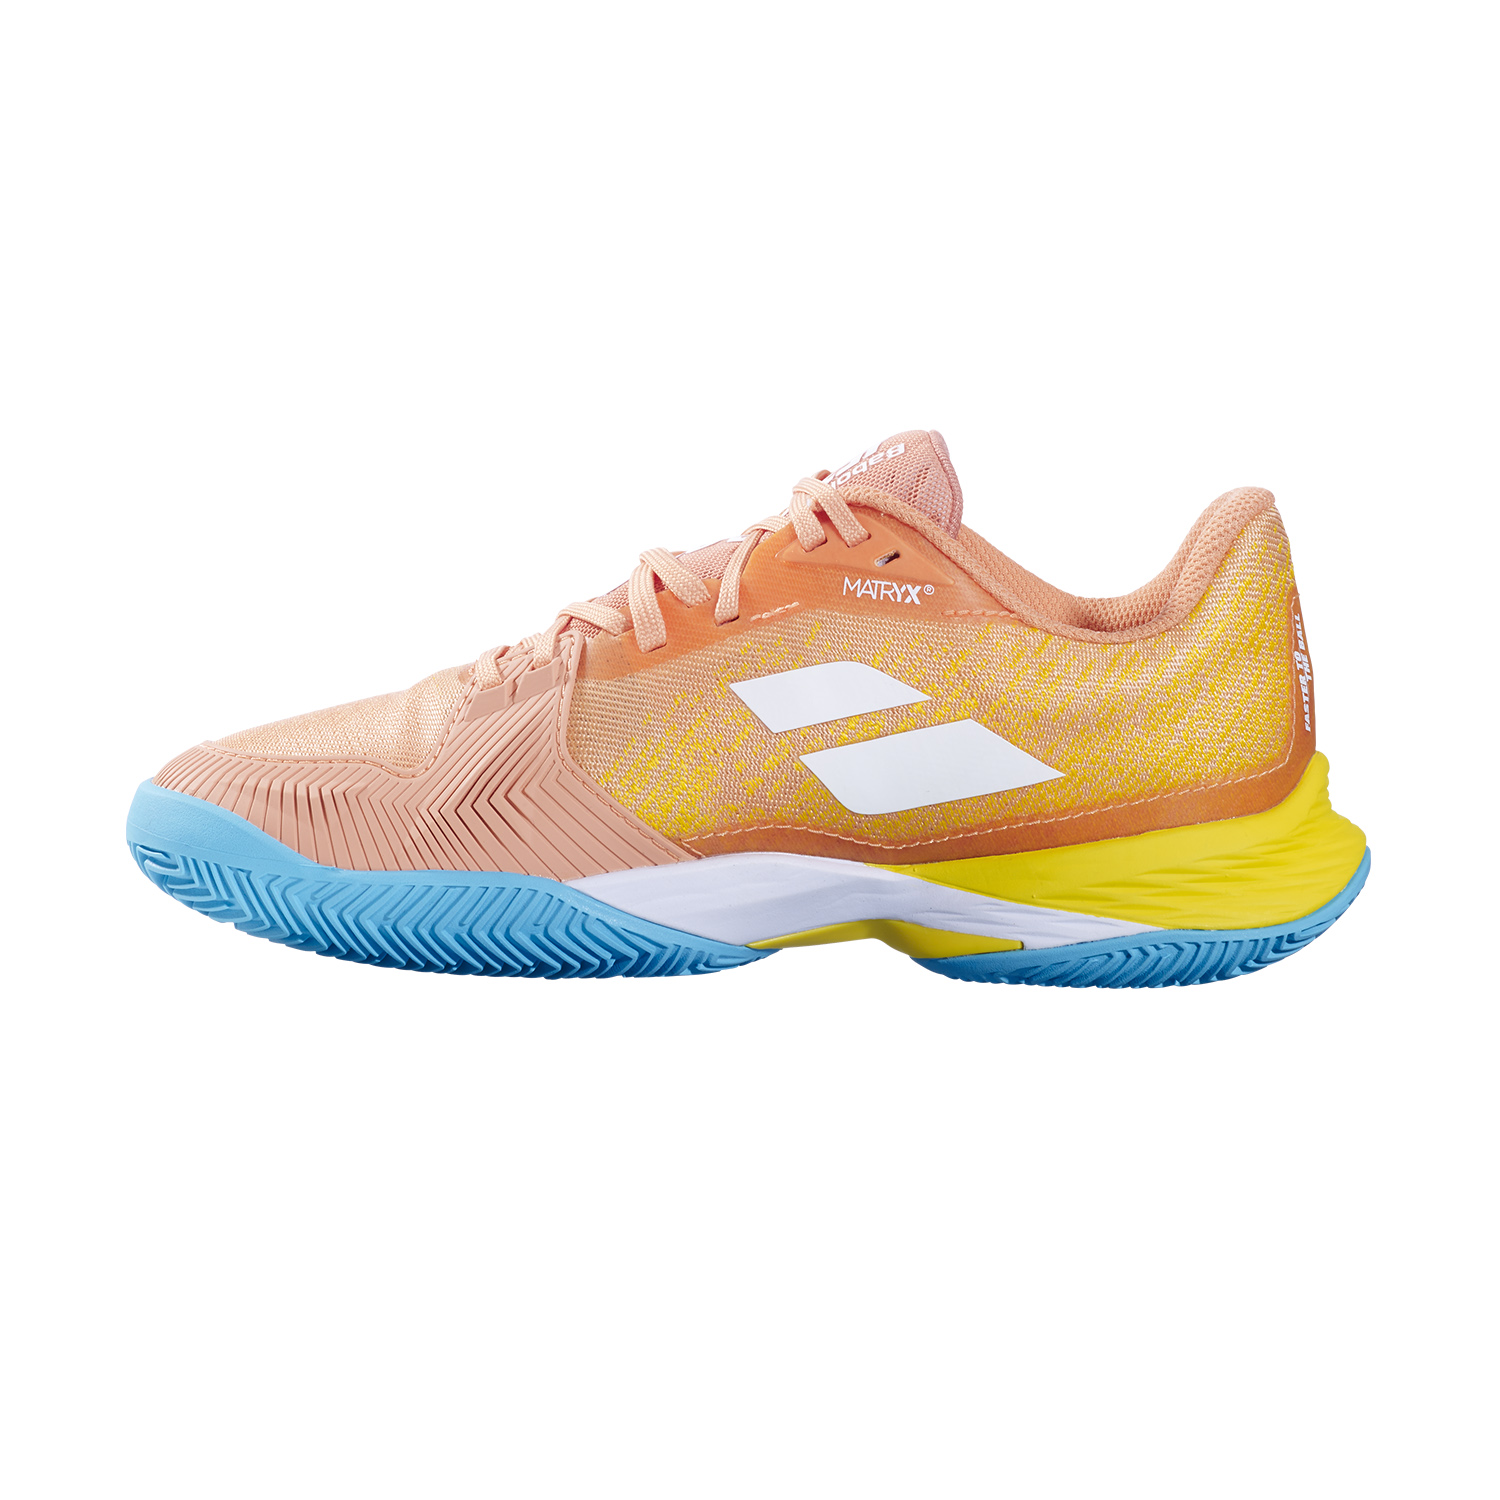 Babolat Jet Mach 3 Clay - Coral/Gold Fusion